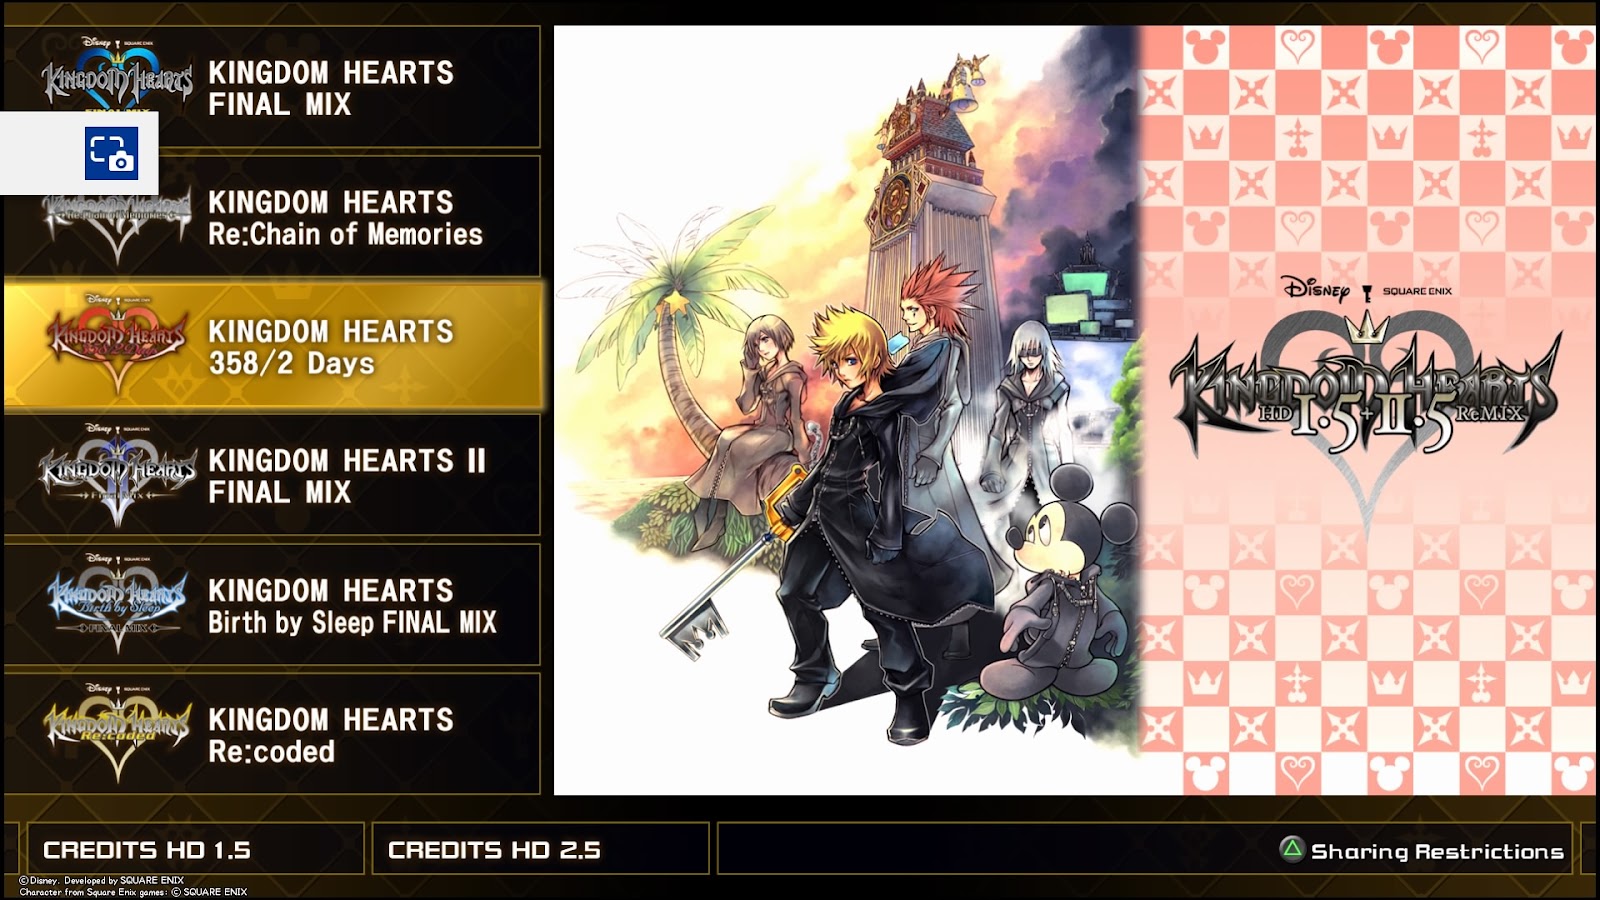 358/2 Days, as seen from the collection’s menu | Kingdom Hearts Re:Chain of Memories